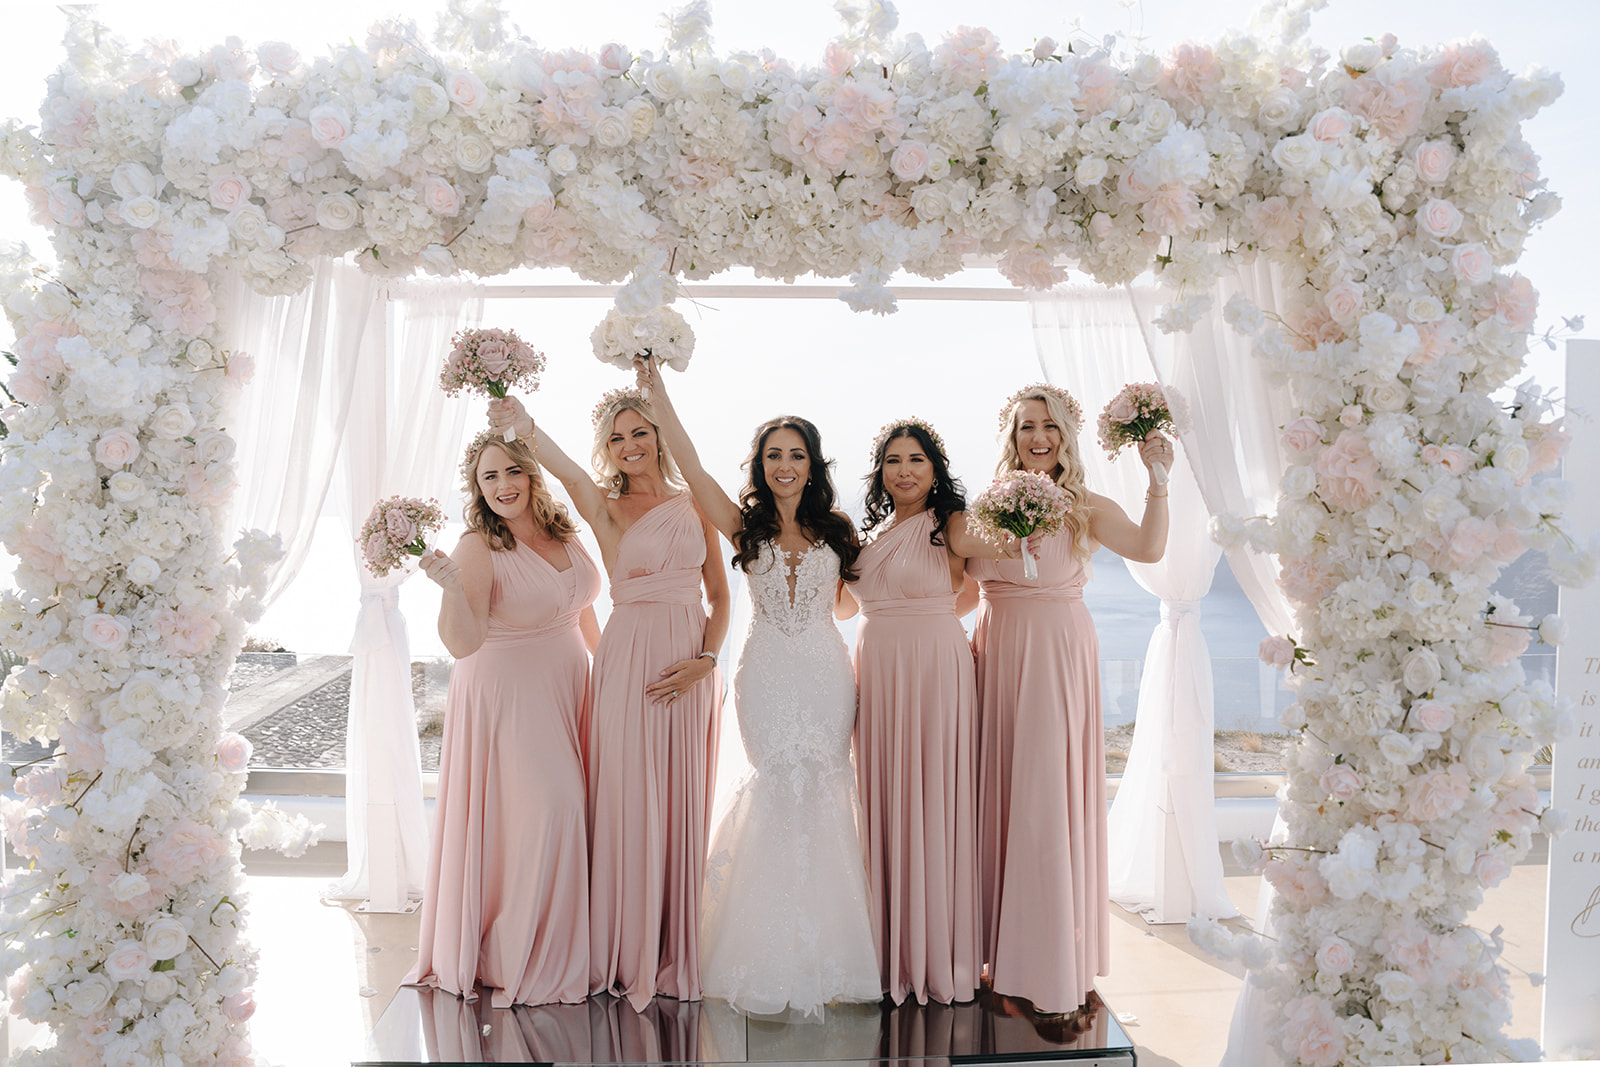 bride and bridesmaids wearing pale pink dresses at destination wedding